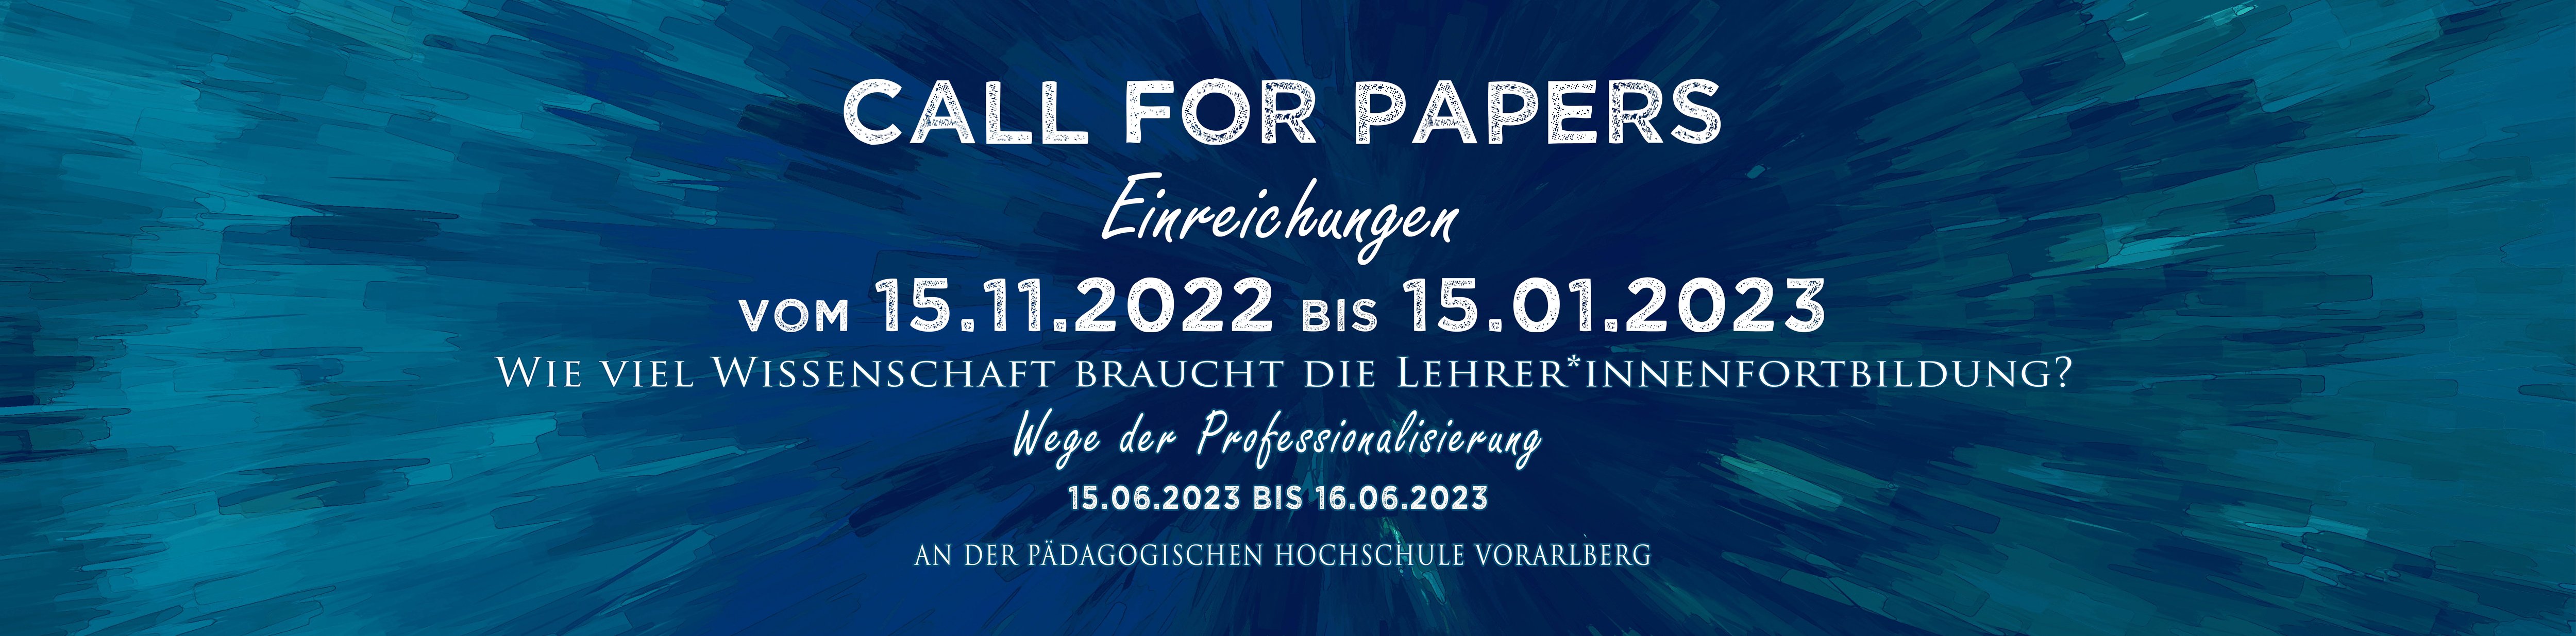 CALL_FOR_PAPERS_BANNER_HP